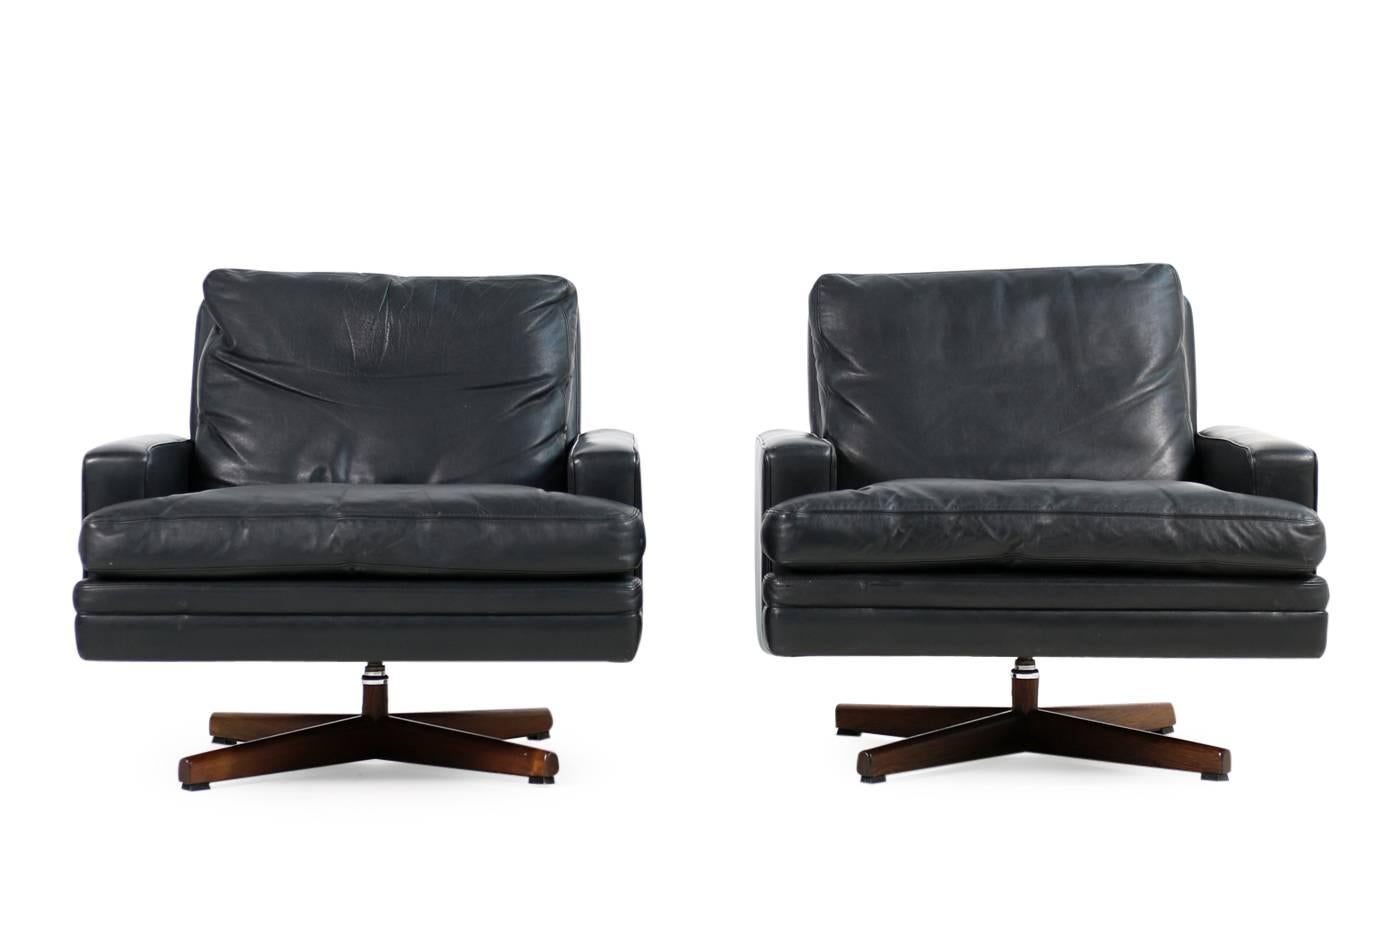 Beautiful and very rare pair of 1960s leather and rosewood swivel lounge chairs, by Fredrik Kayser for Vatne Mobler, Norway. Down filling cushions, metal and wooden base. Fantastic condition, a matching three-seat sofa is available, please visit our